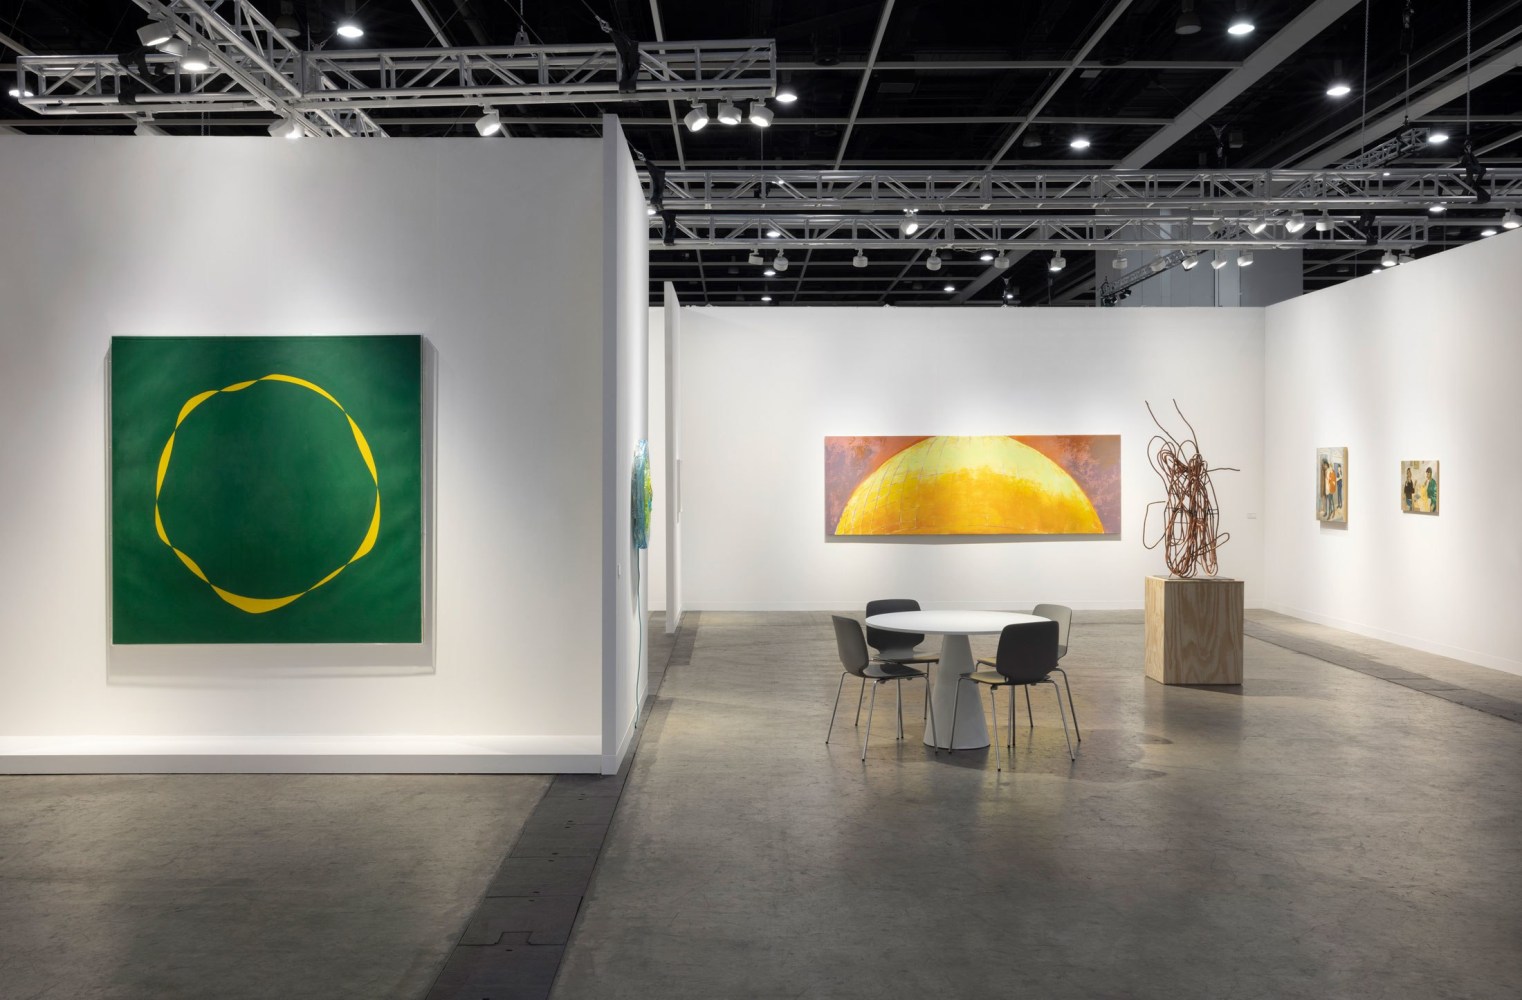 Luhring Augustine
Art Basel Hong Kong, Booth 3D04
Installation view
2023
Photo: Andrea Rossetti